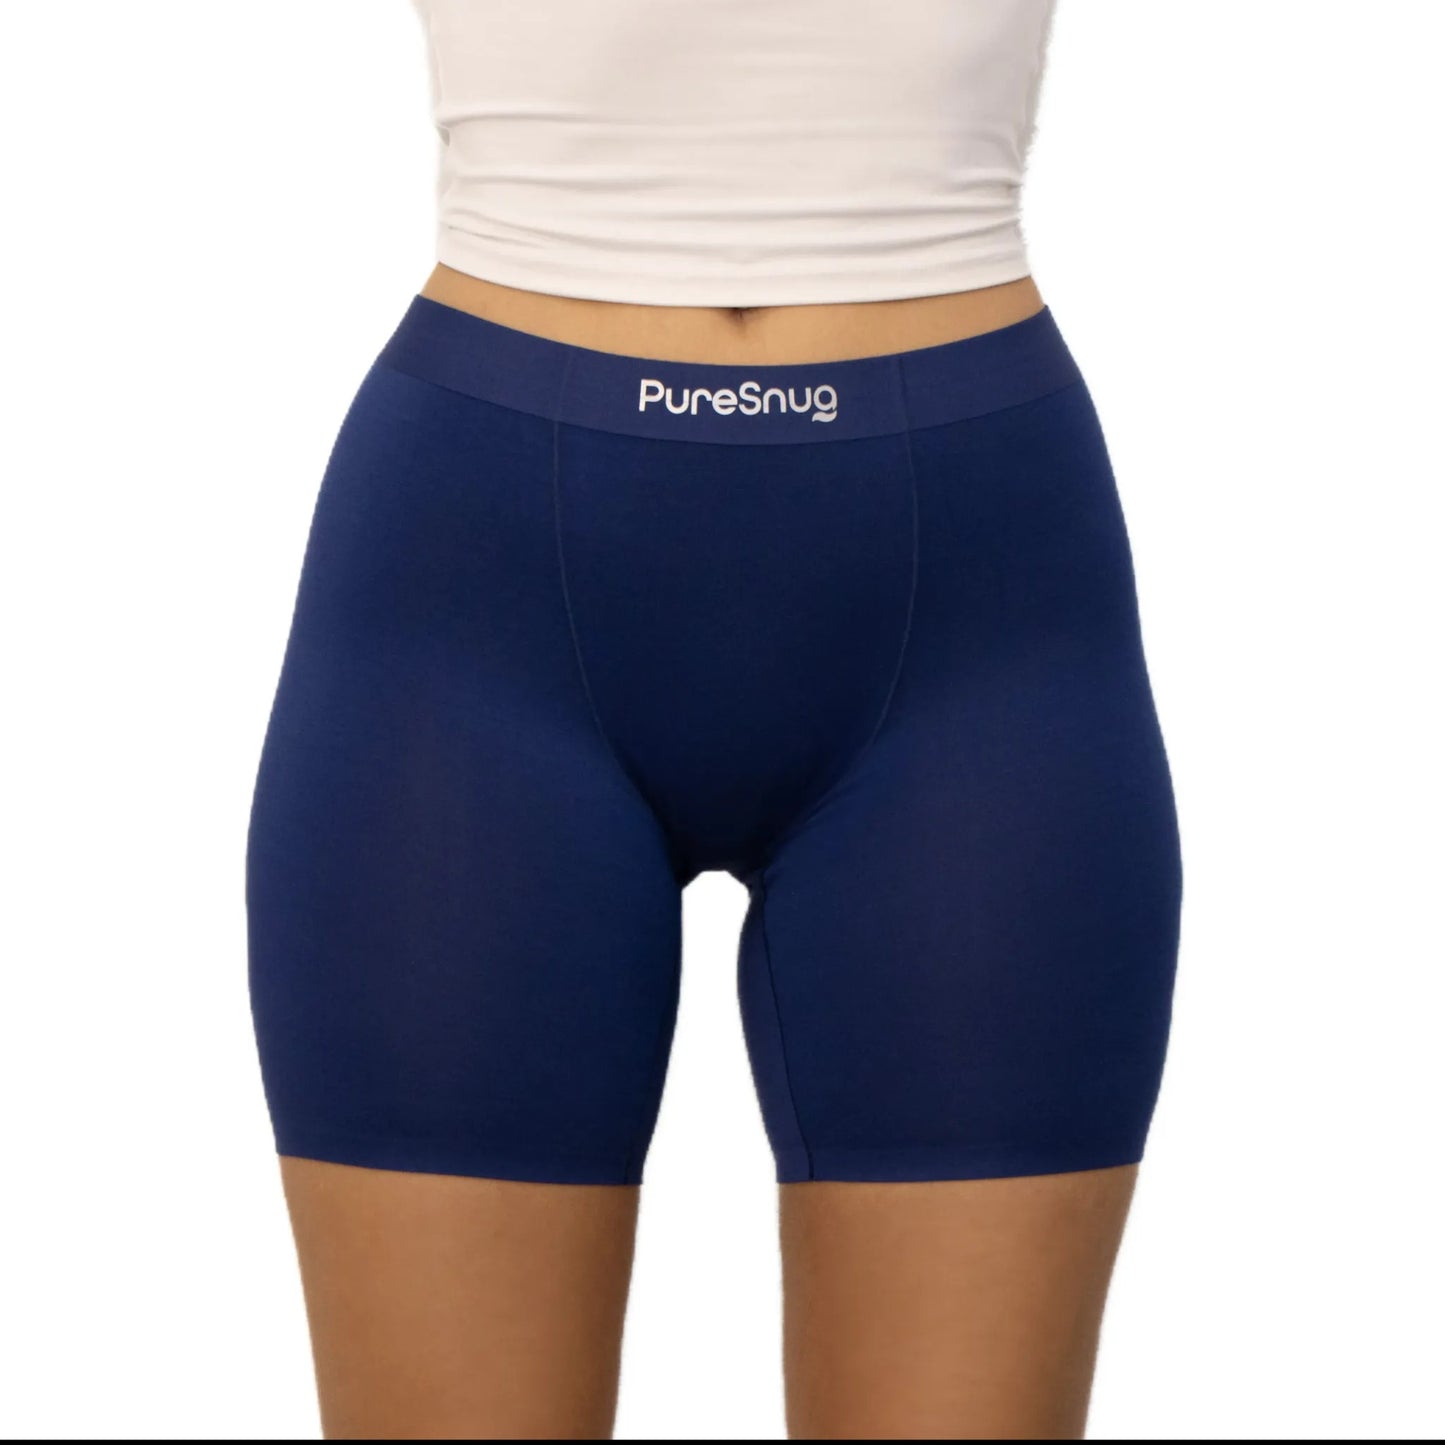 puresnug ladies' boxer briefs front view in navy colour